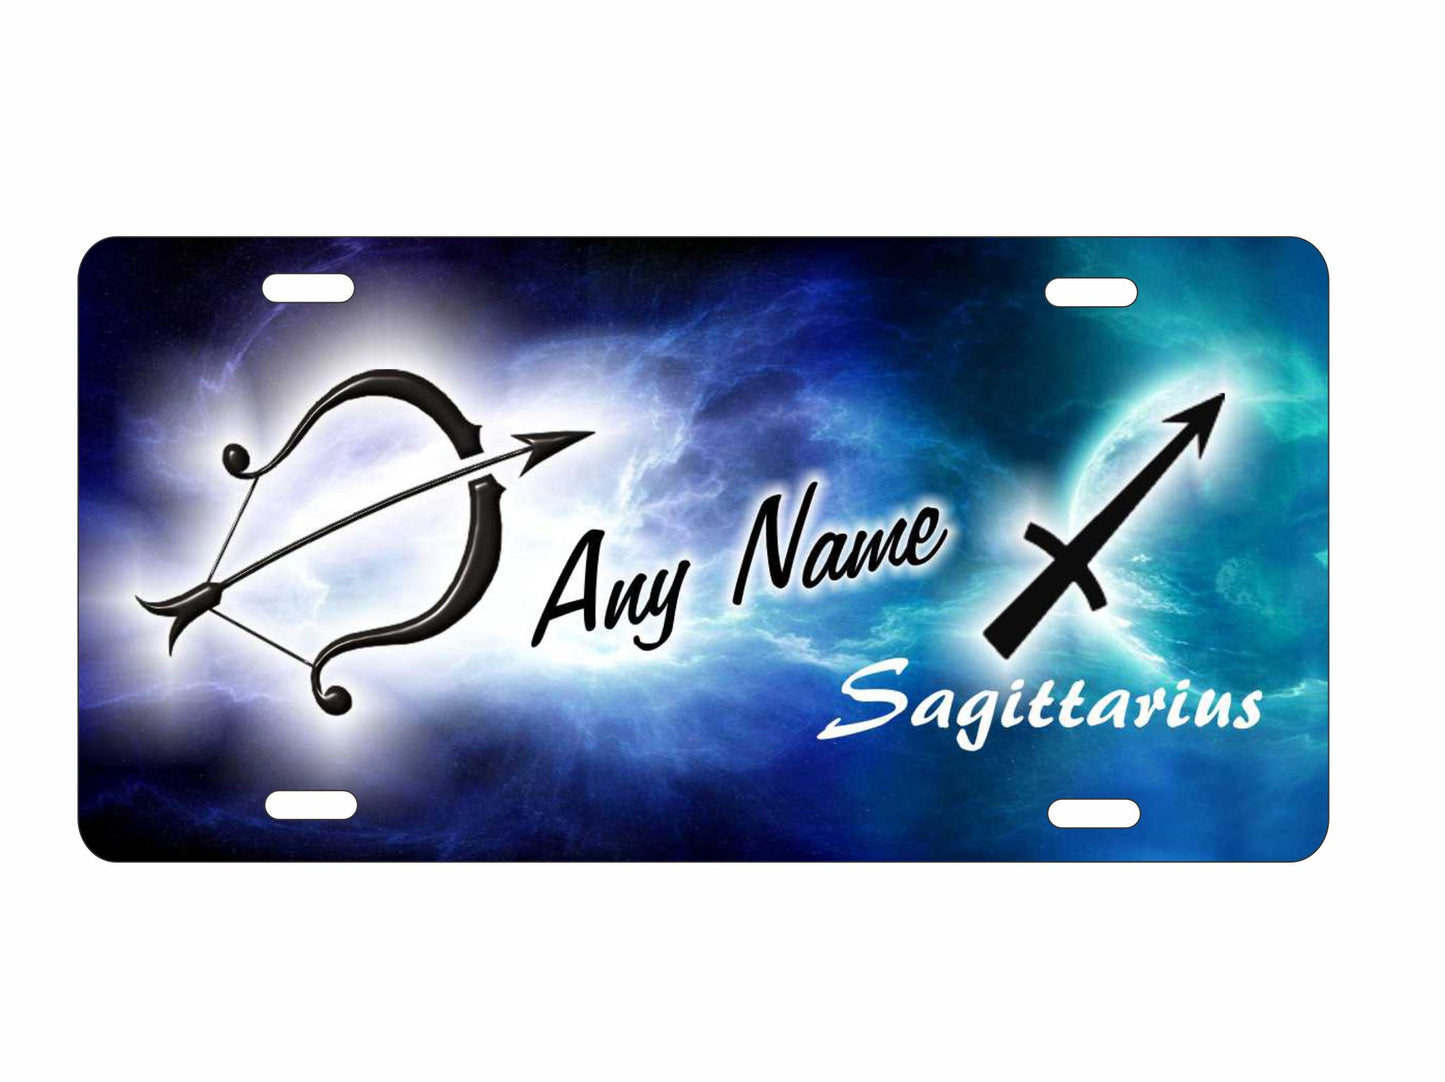 Sagittarius zodiac symbol Astrological sign personalized novelty decorative front license plate